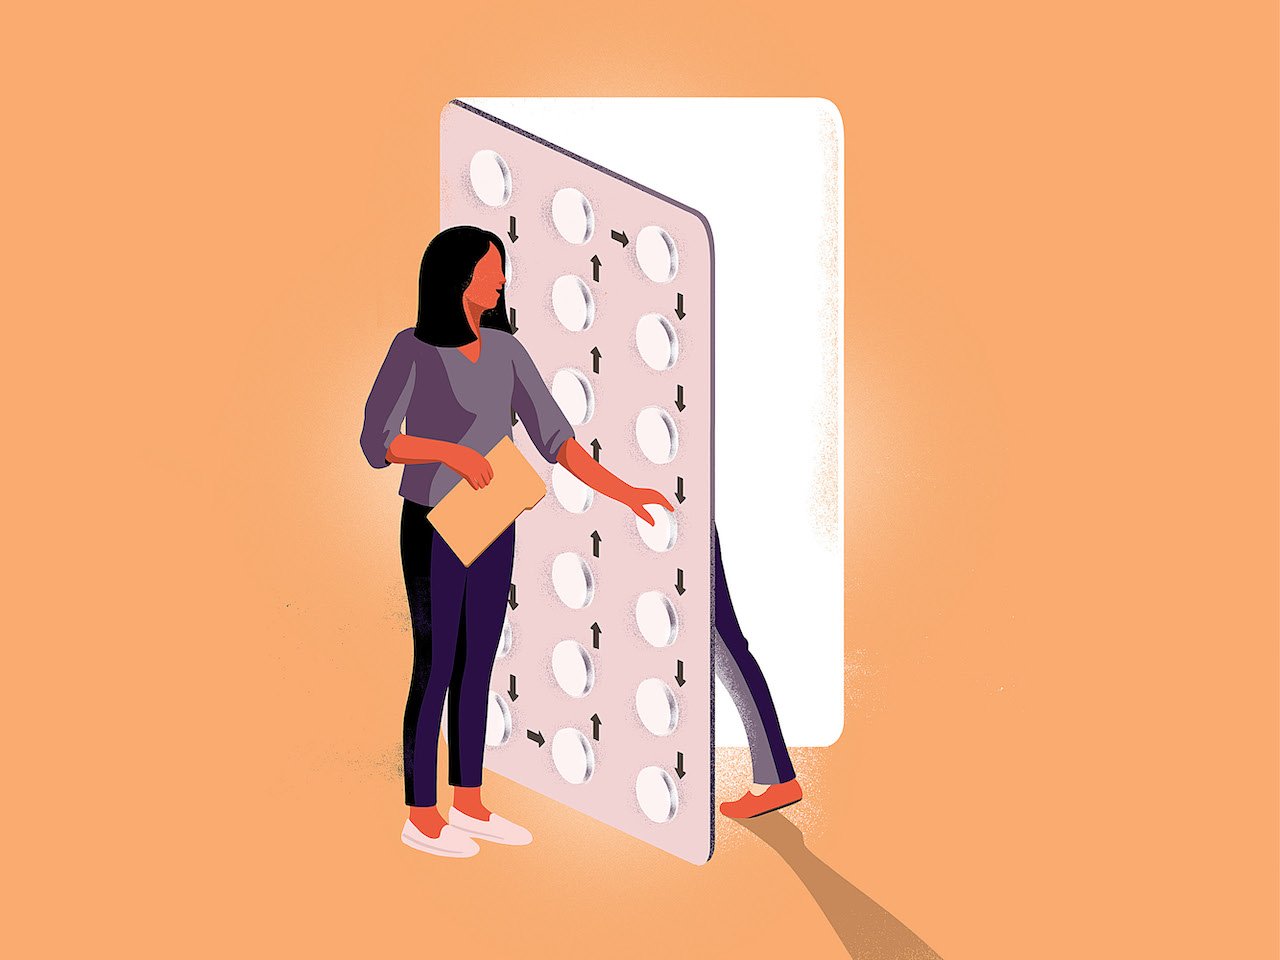 Midwives in Canada: an illustration of a woman holding a clipboard opening a door that resembles a pack of birth control pills